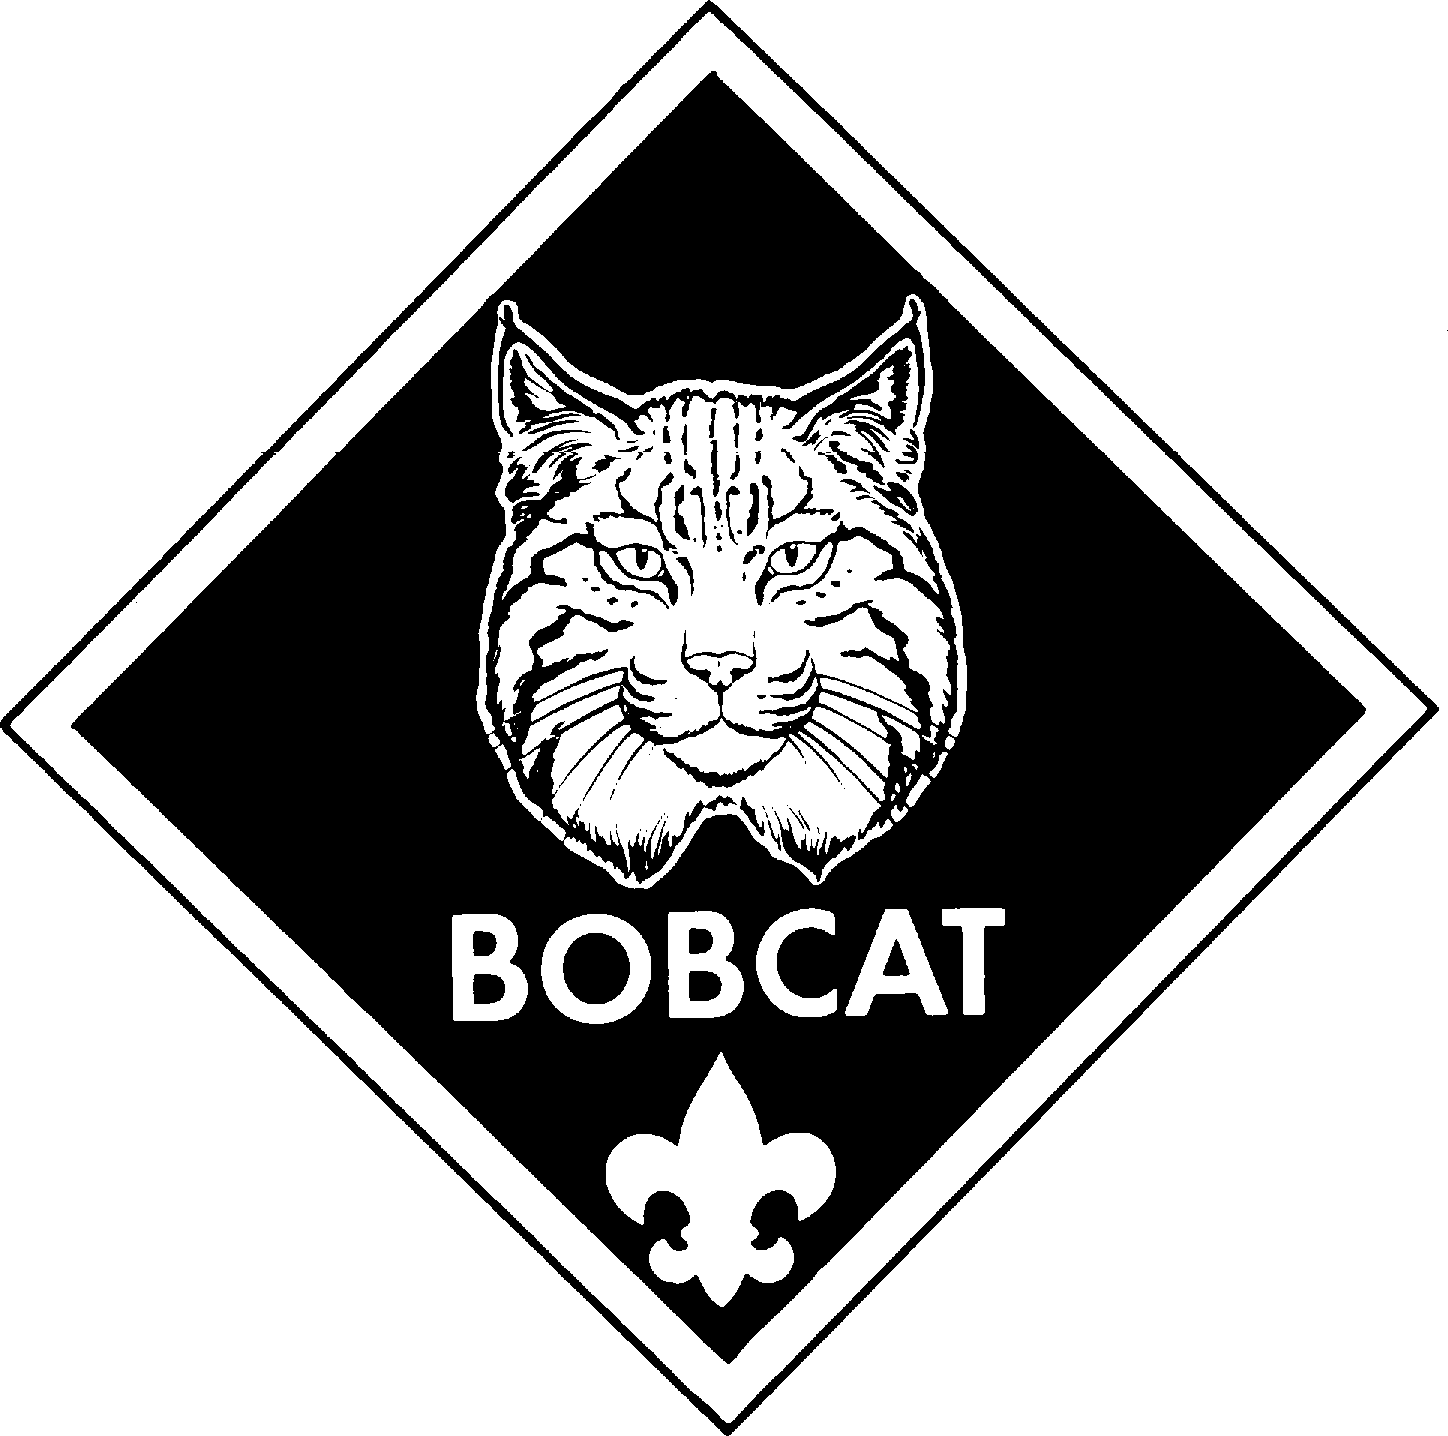 Images In The Bsa Cub Scouts Bobcat Insignia Directory